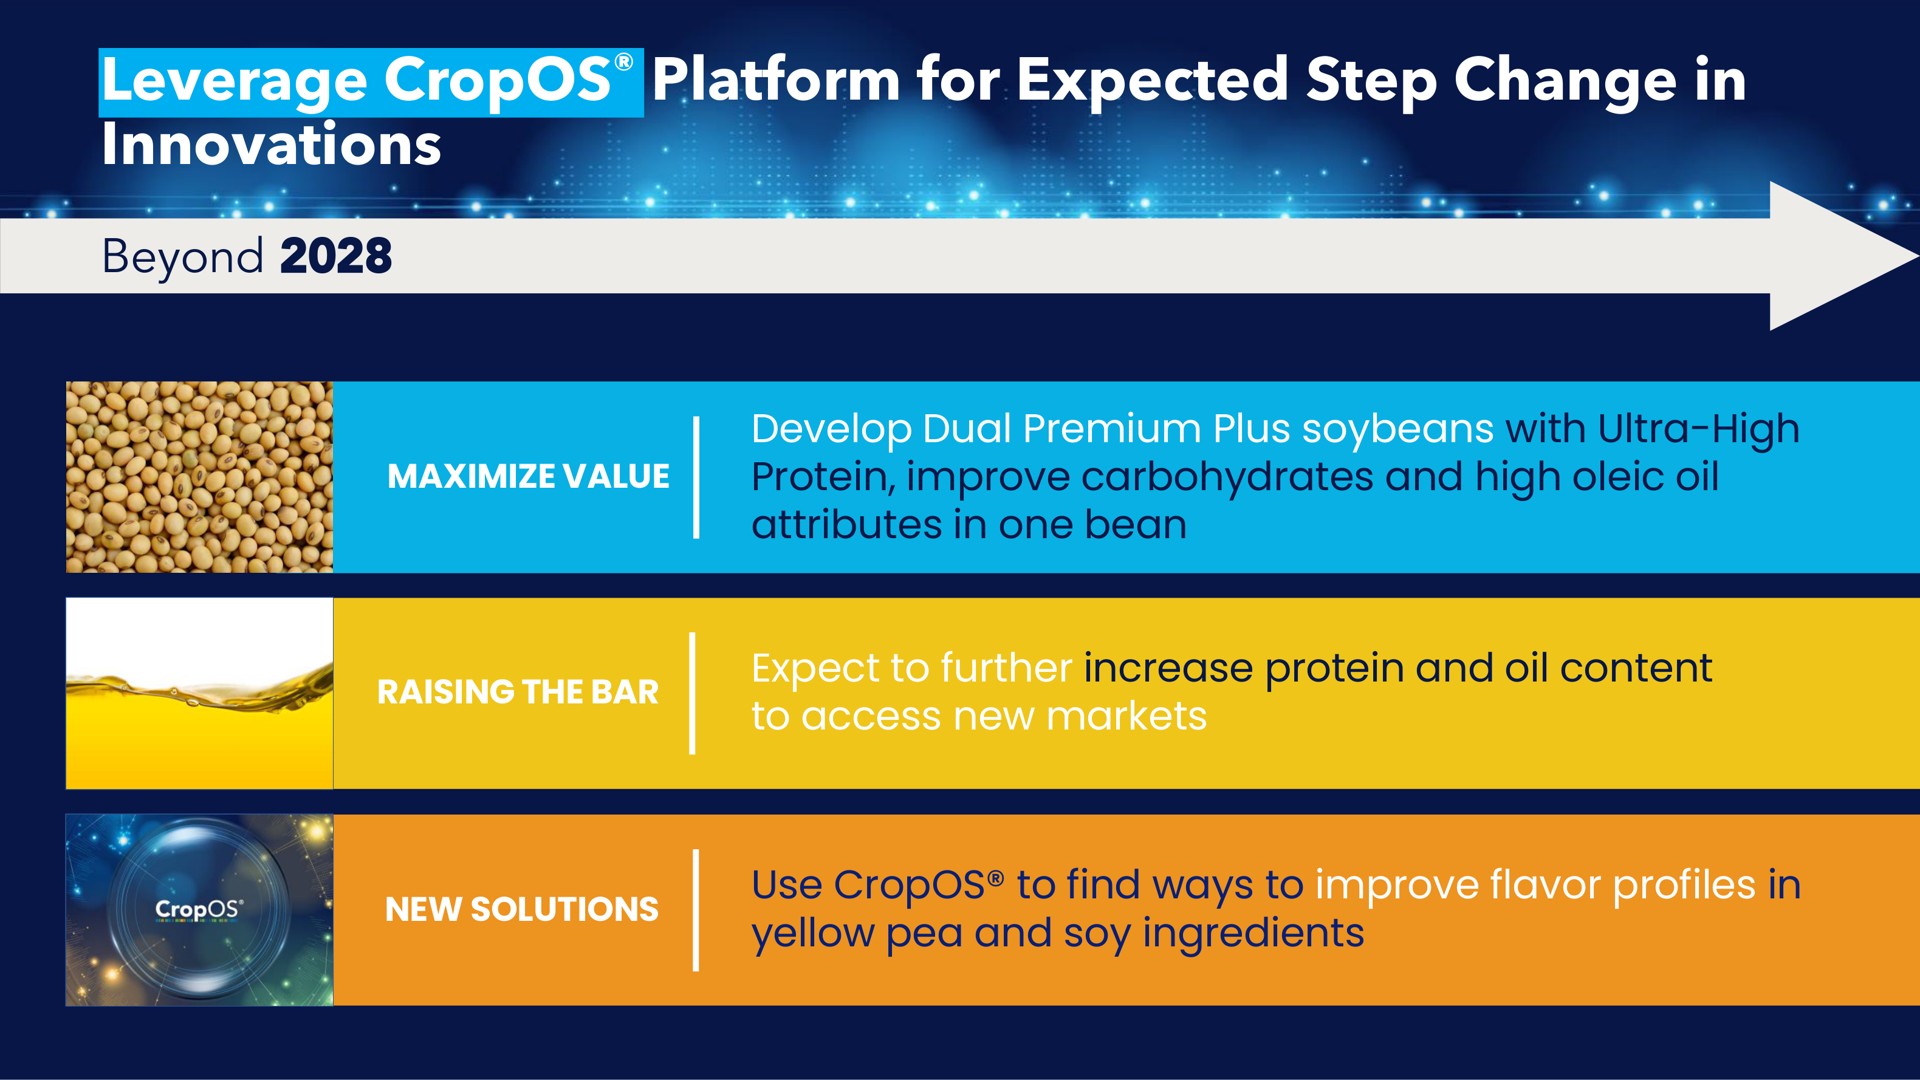 leverage platform for expected step change in innovations beyond maximize value develop dual premium plus soybeans with ultra high protein improve carbohydrates and high oleic oil attributes in one bean raising the bar expect to further increase protein and oil content to access new markets new solutions use to find ways to improve flavor profiles in yellow pea and soy ingredients | Benson Hill